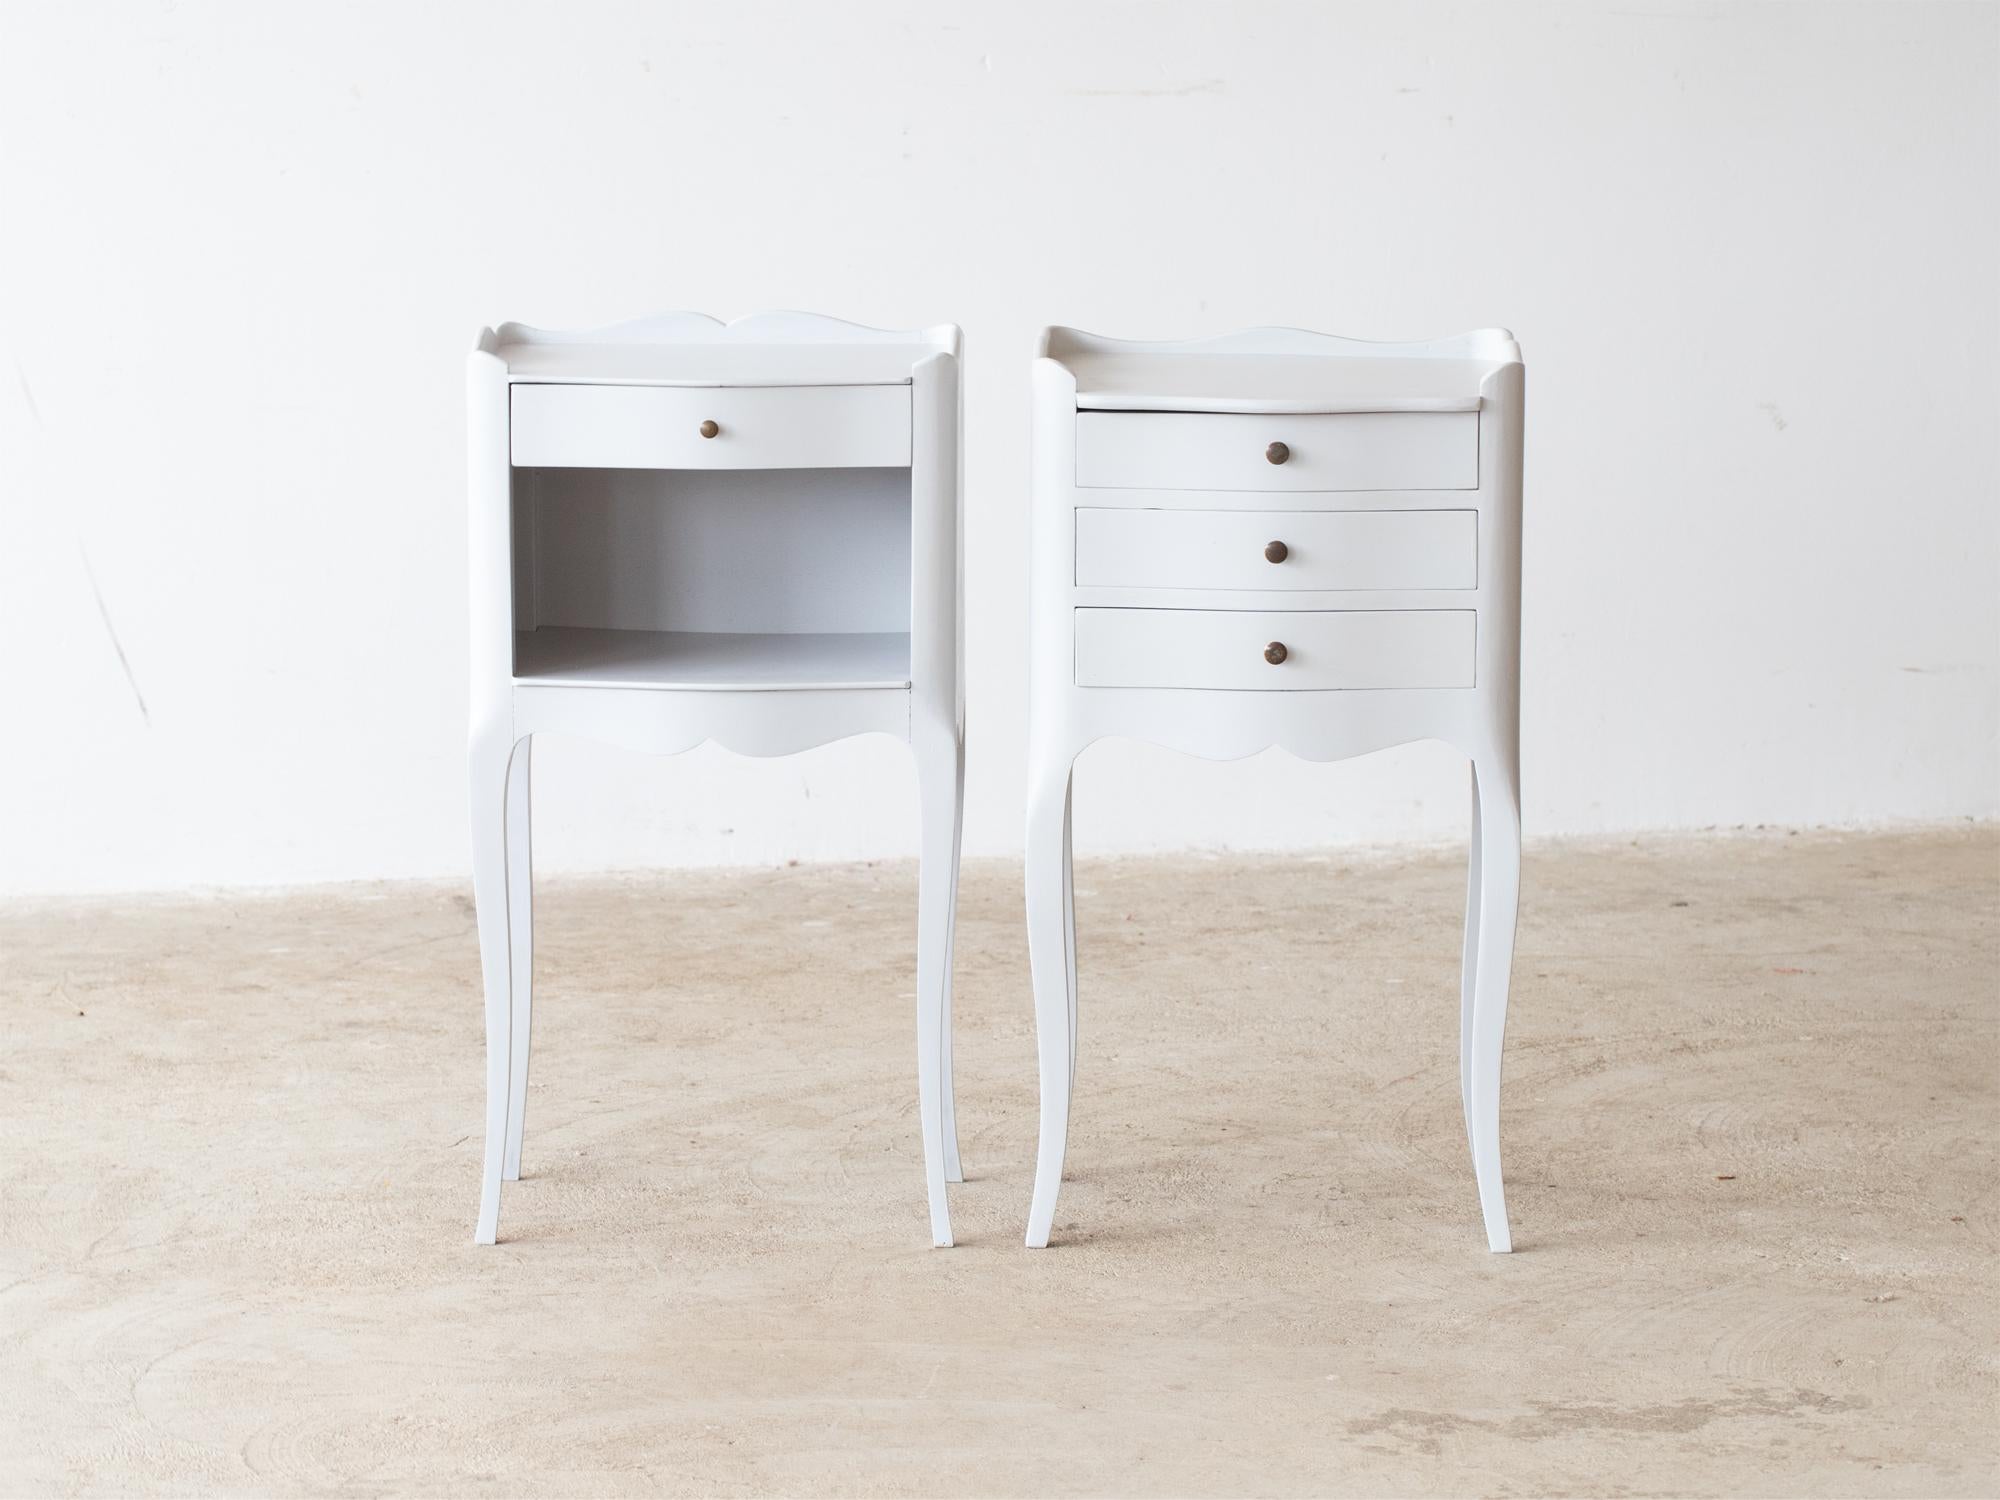 A near pair of white-painted bedside or lamp tables. French, mid 20C.

Stock ref. #2297

Both in very good order with later painted finish.

67.5 x 37 x 30.5 cm

26.6 x 14.6 x 12.0 